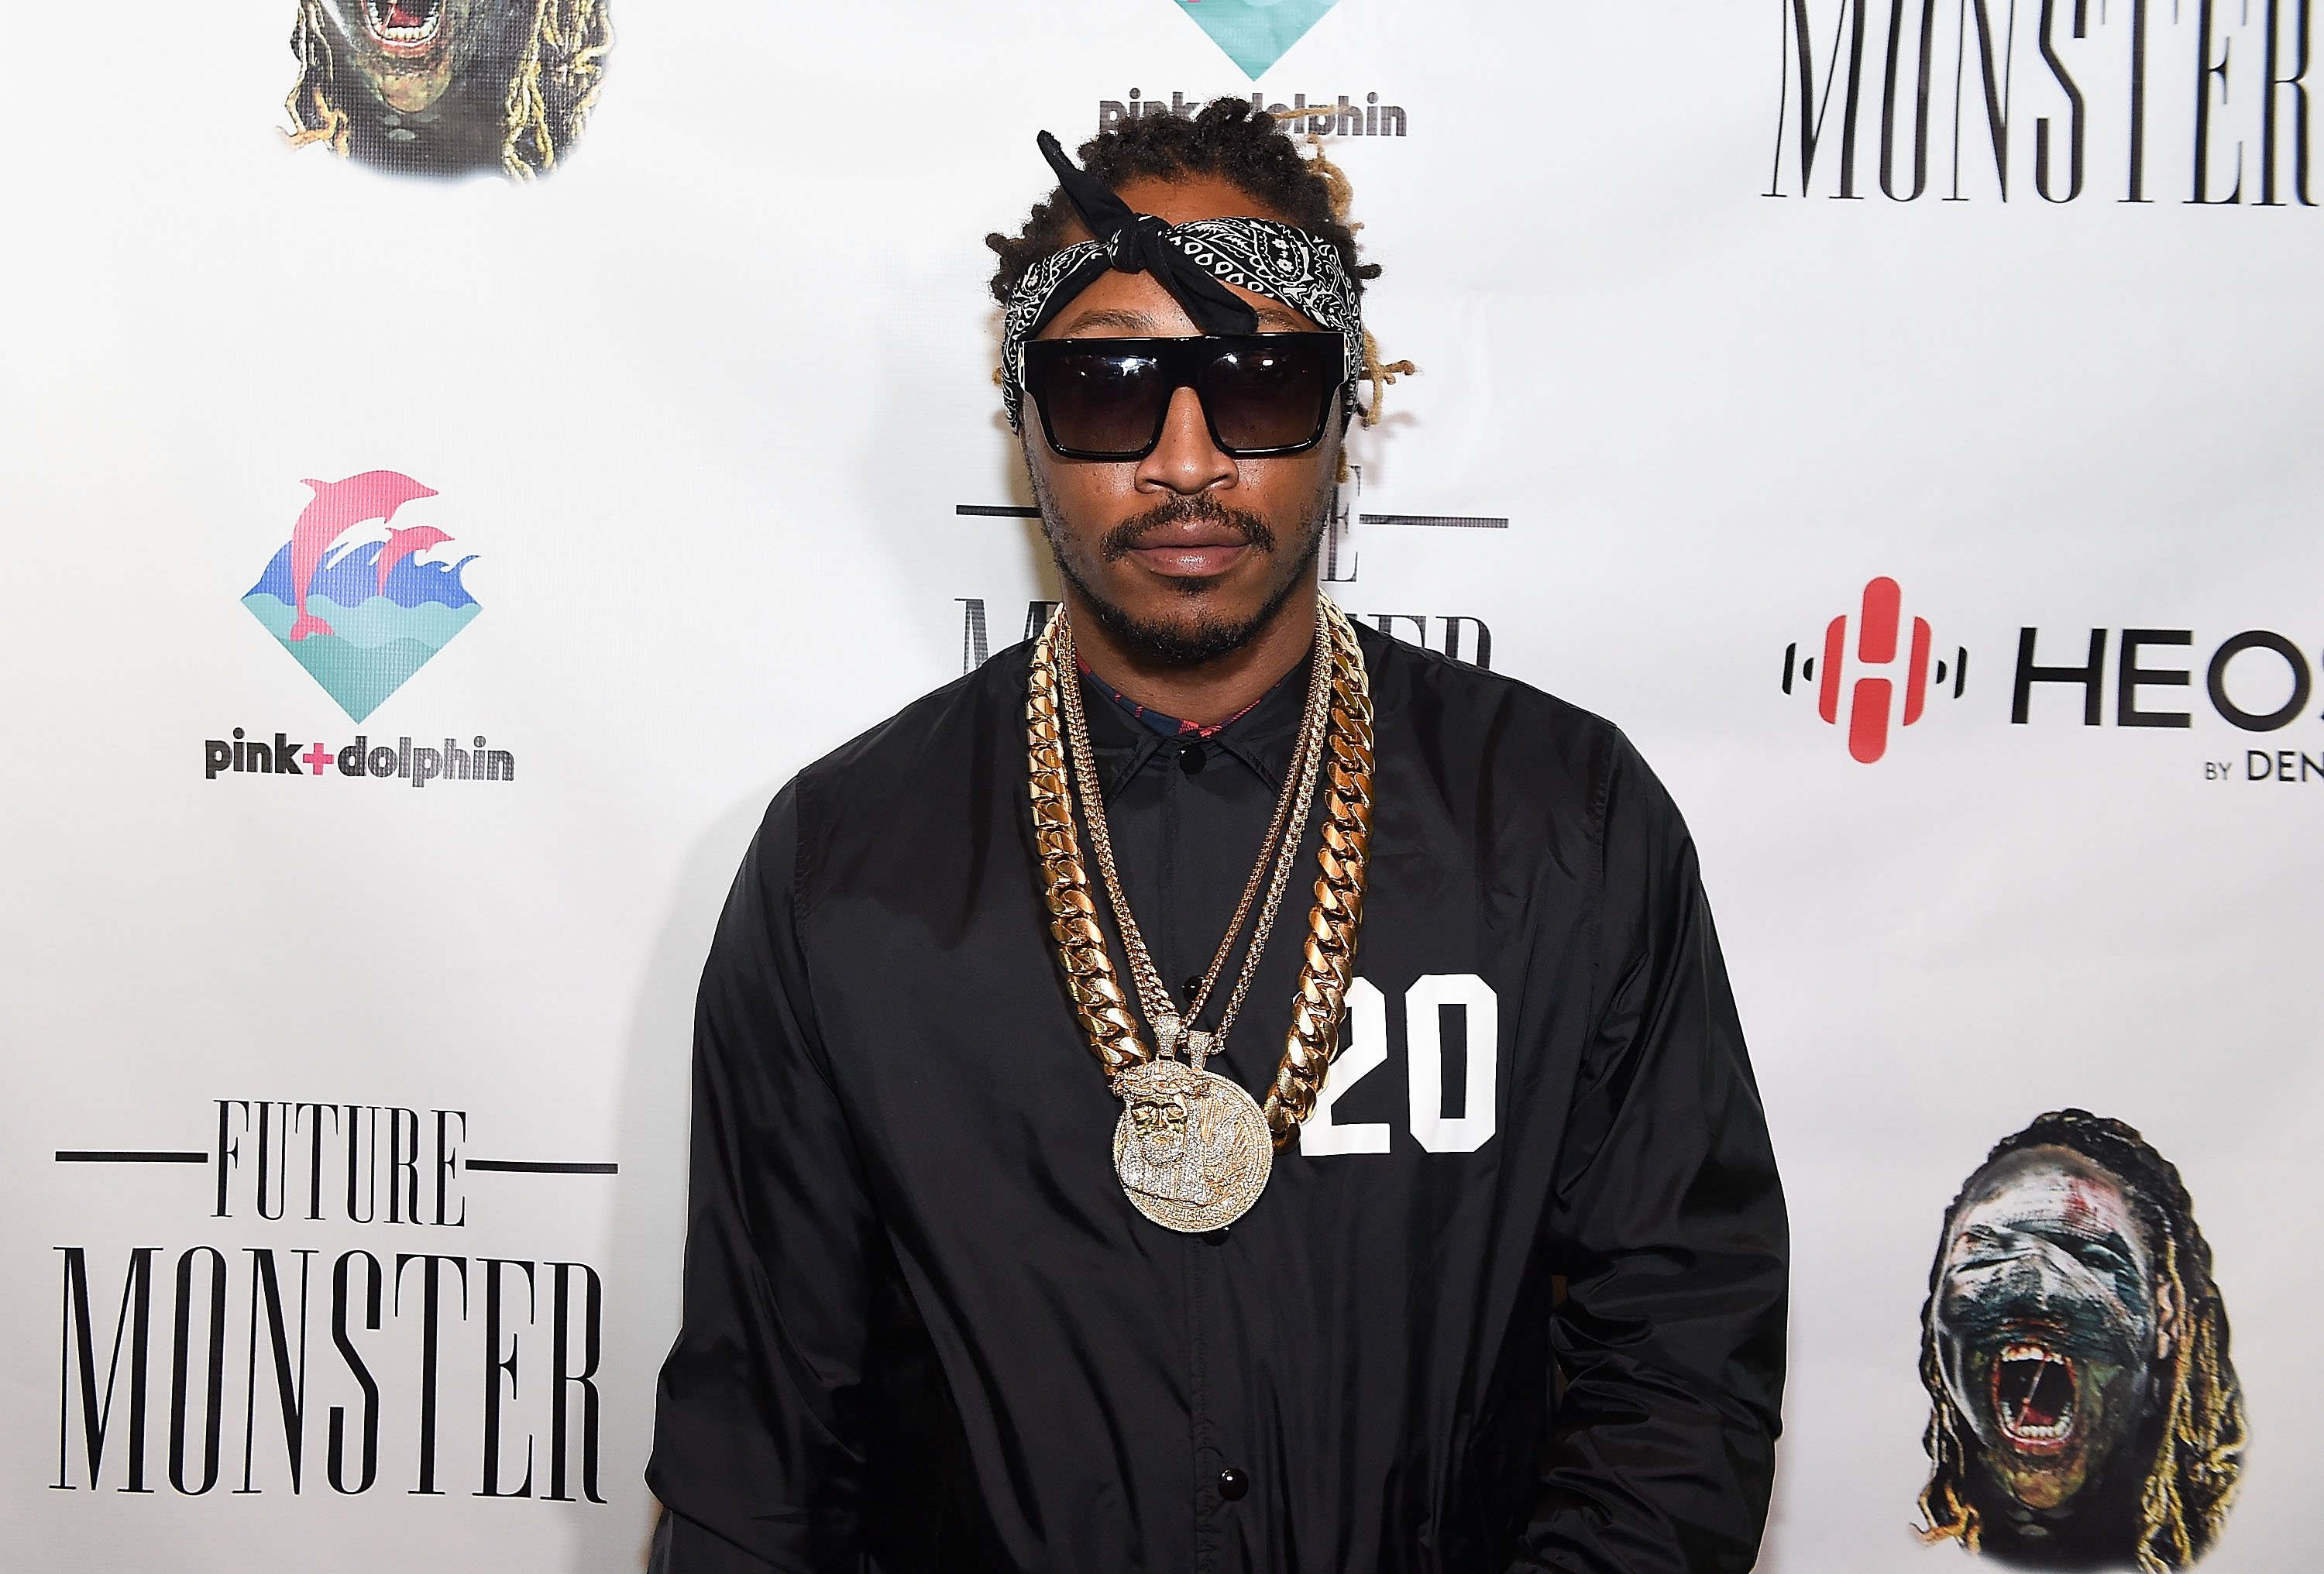 Rapper Future attends the Future Monster Halloween Costume Party in Georgia in October 2014. | Photo: Getty Images